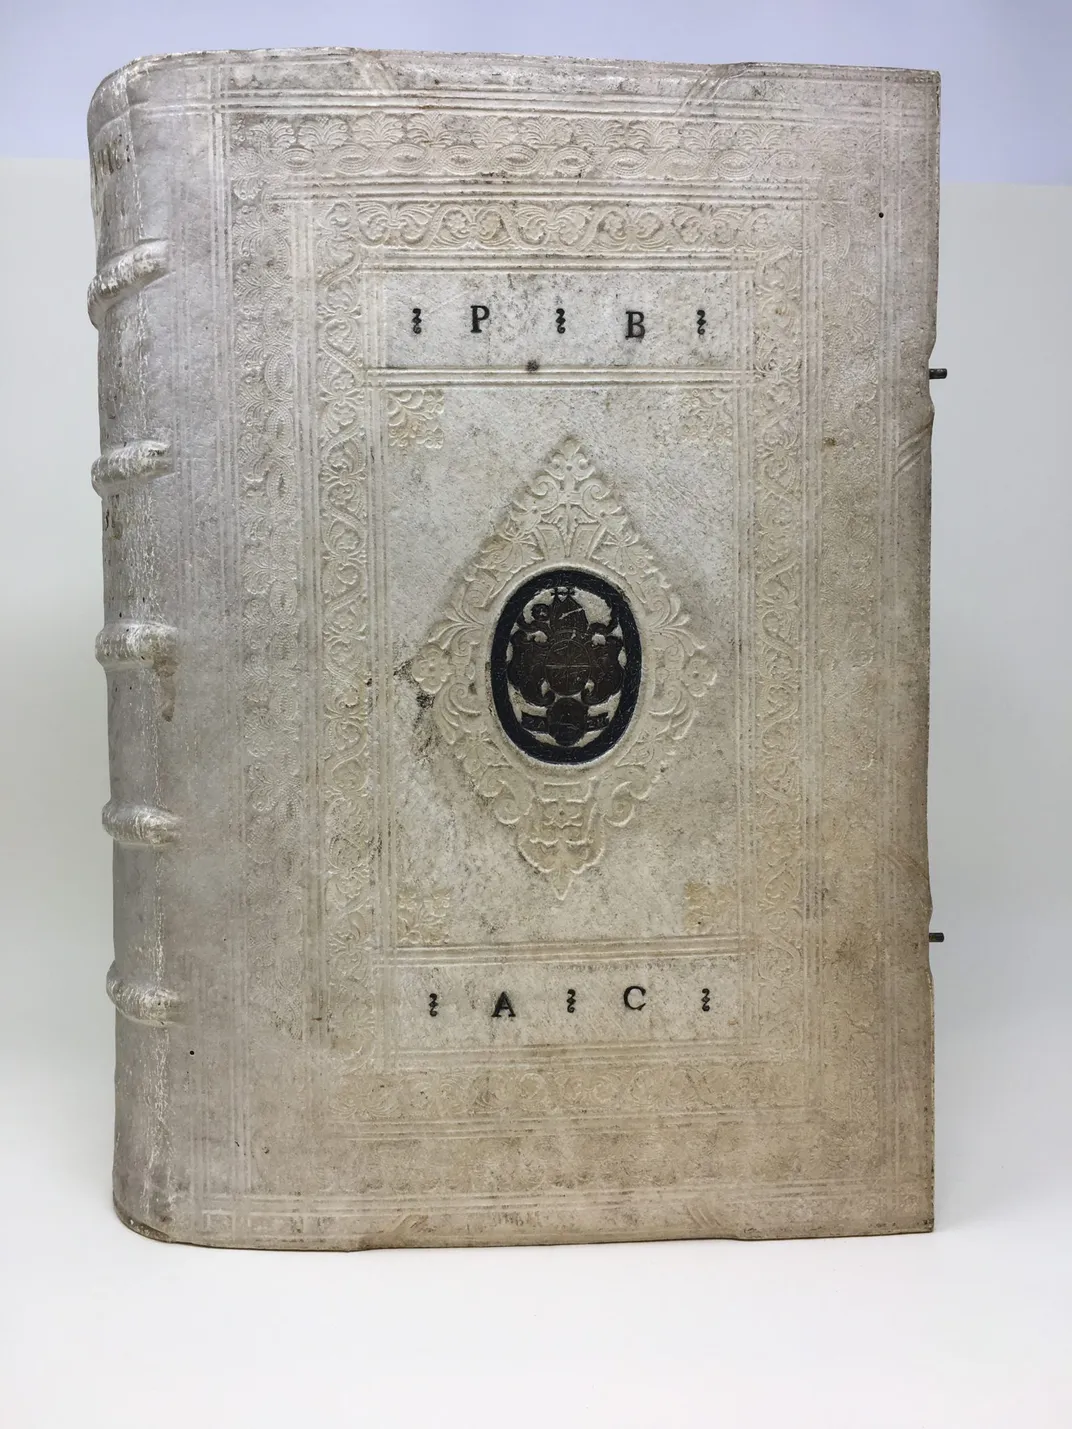 Rare book with white pigskin binding and metal hardware.